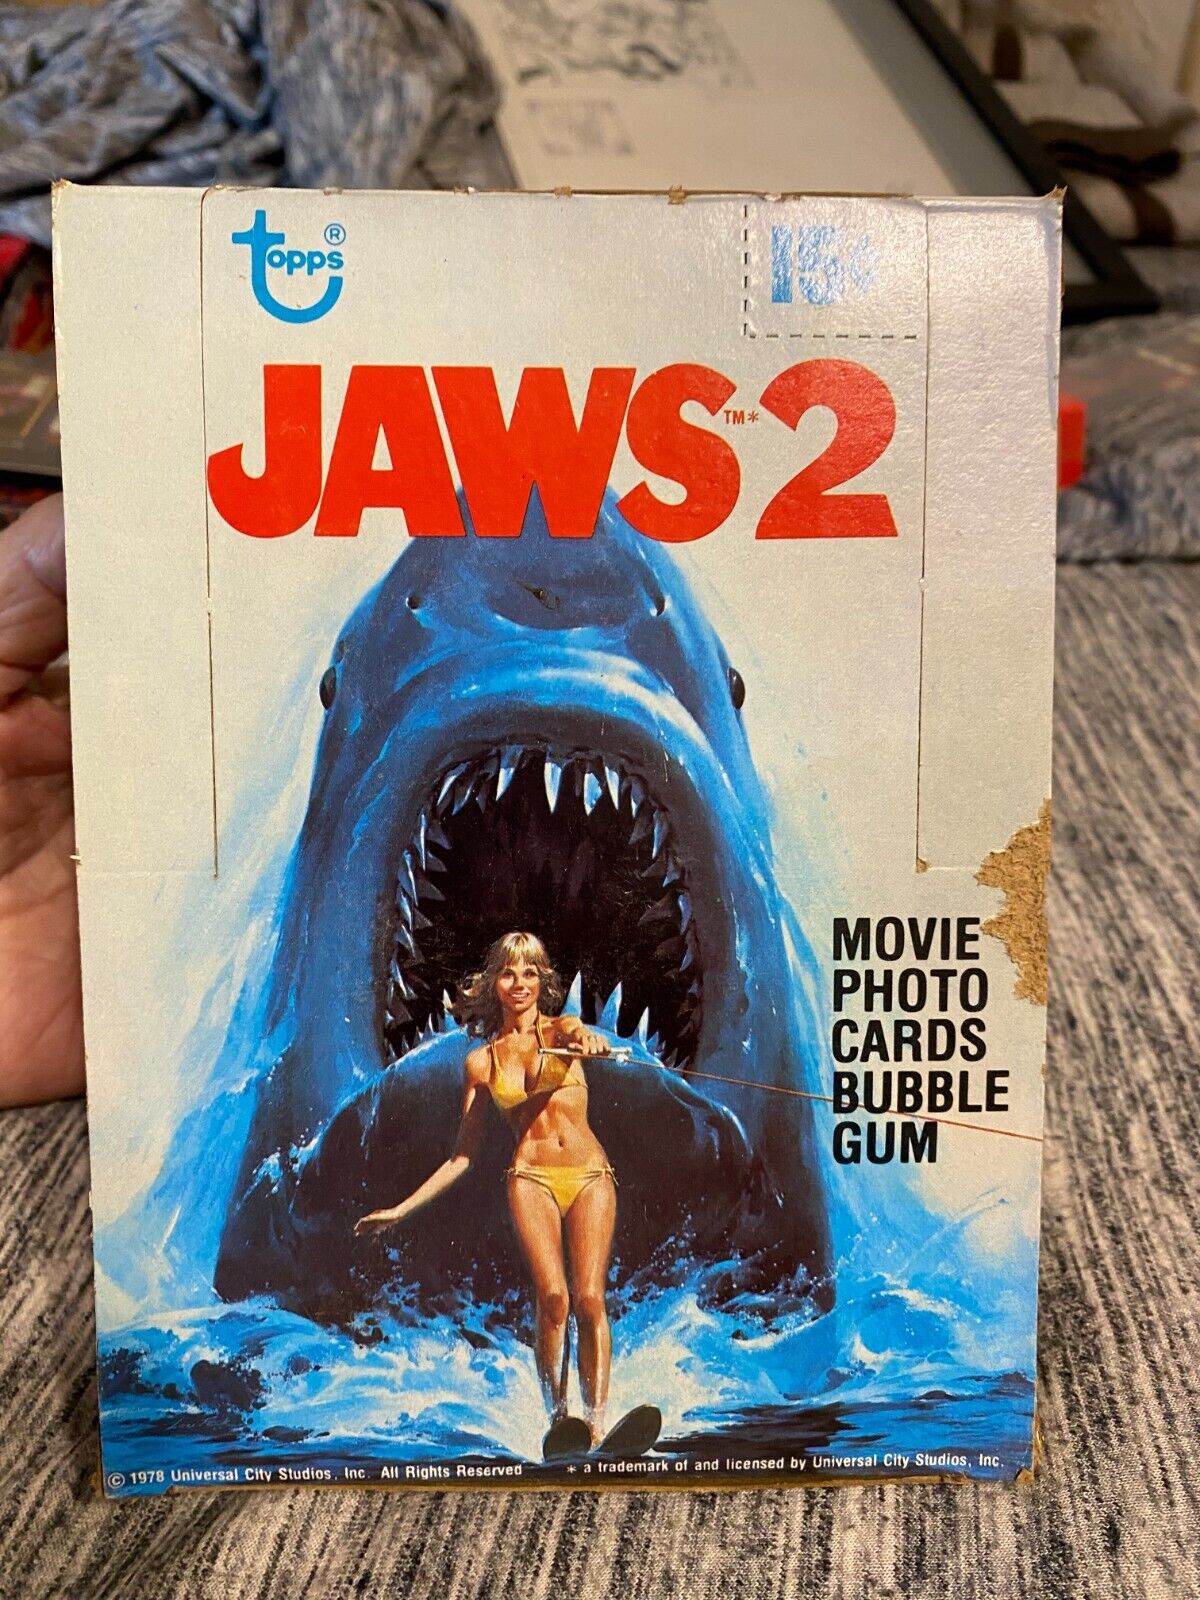 Topps Jaws 2 Card Box 36 sealed Packs Movie Collectible Rare Vintage Memorabilia